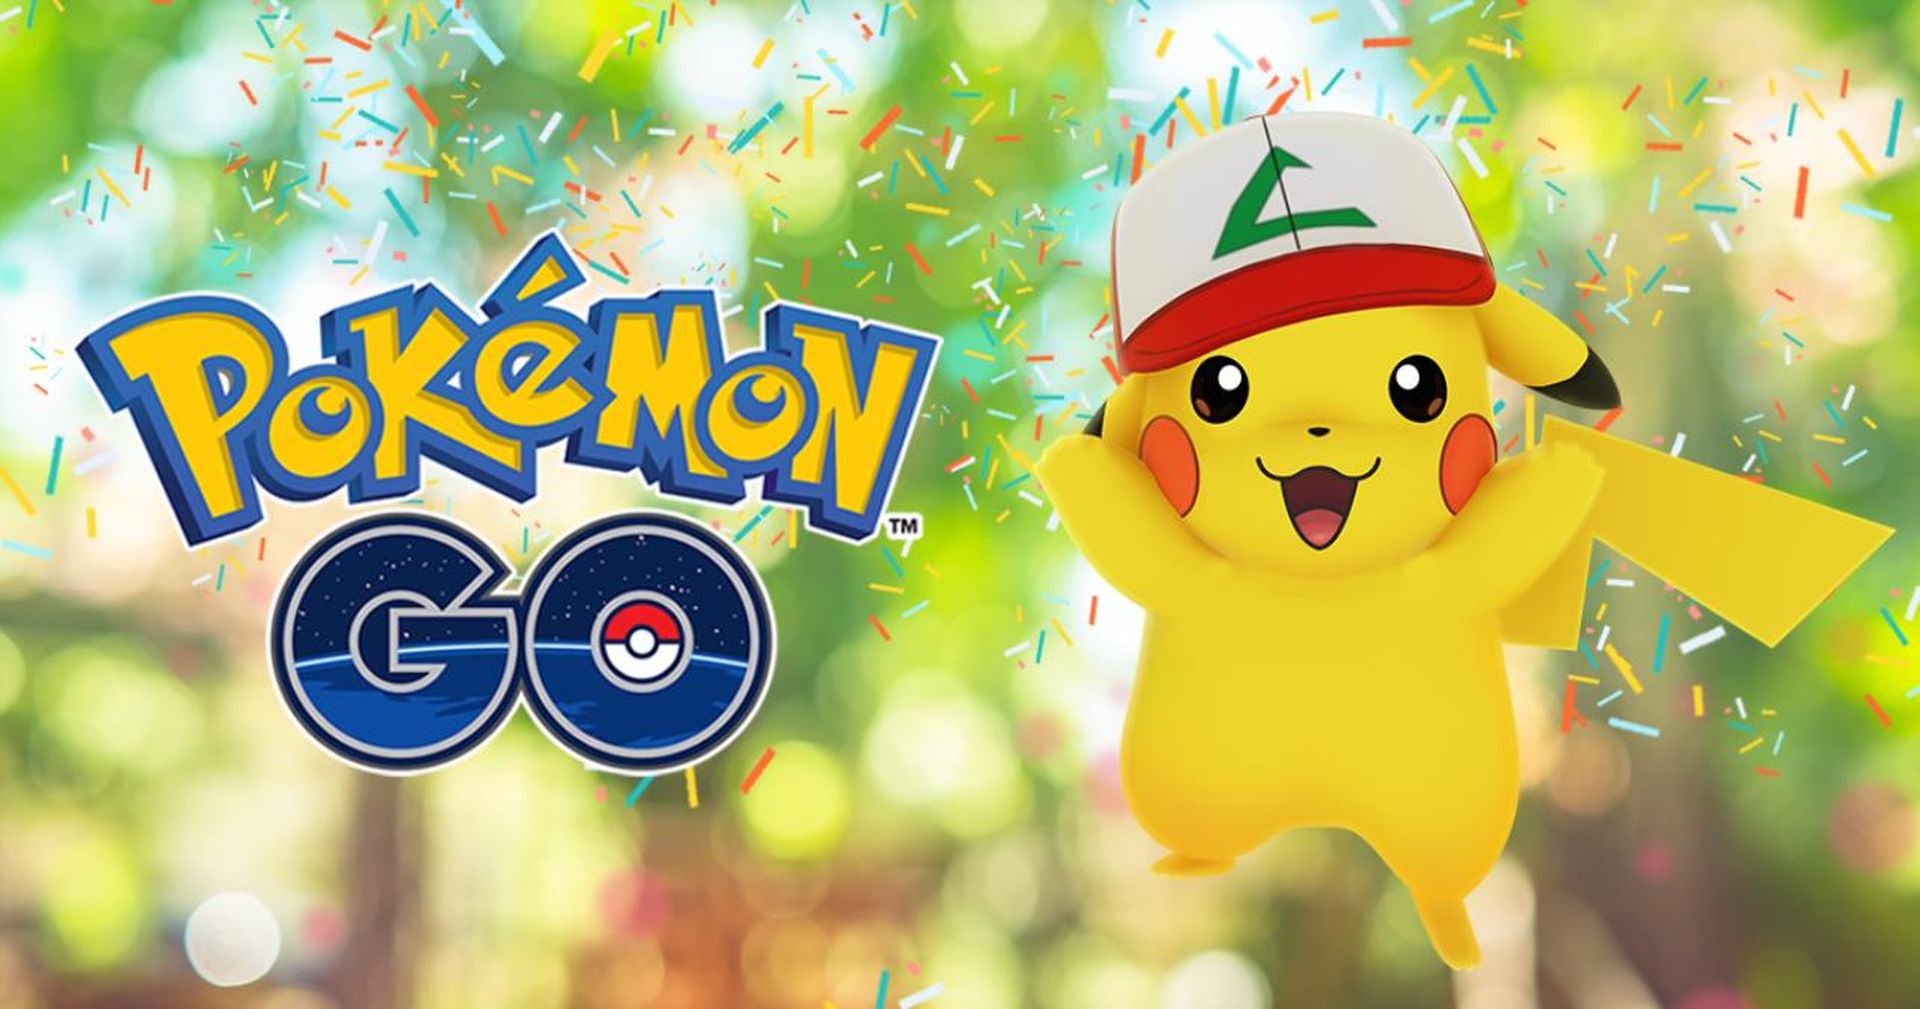 All Pokemon Go codes for August 2022: Free loots!